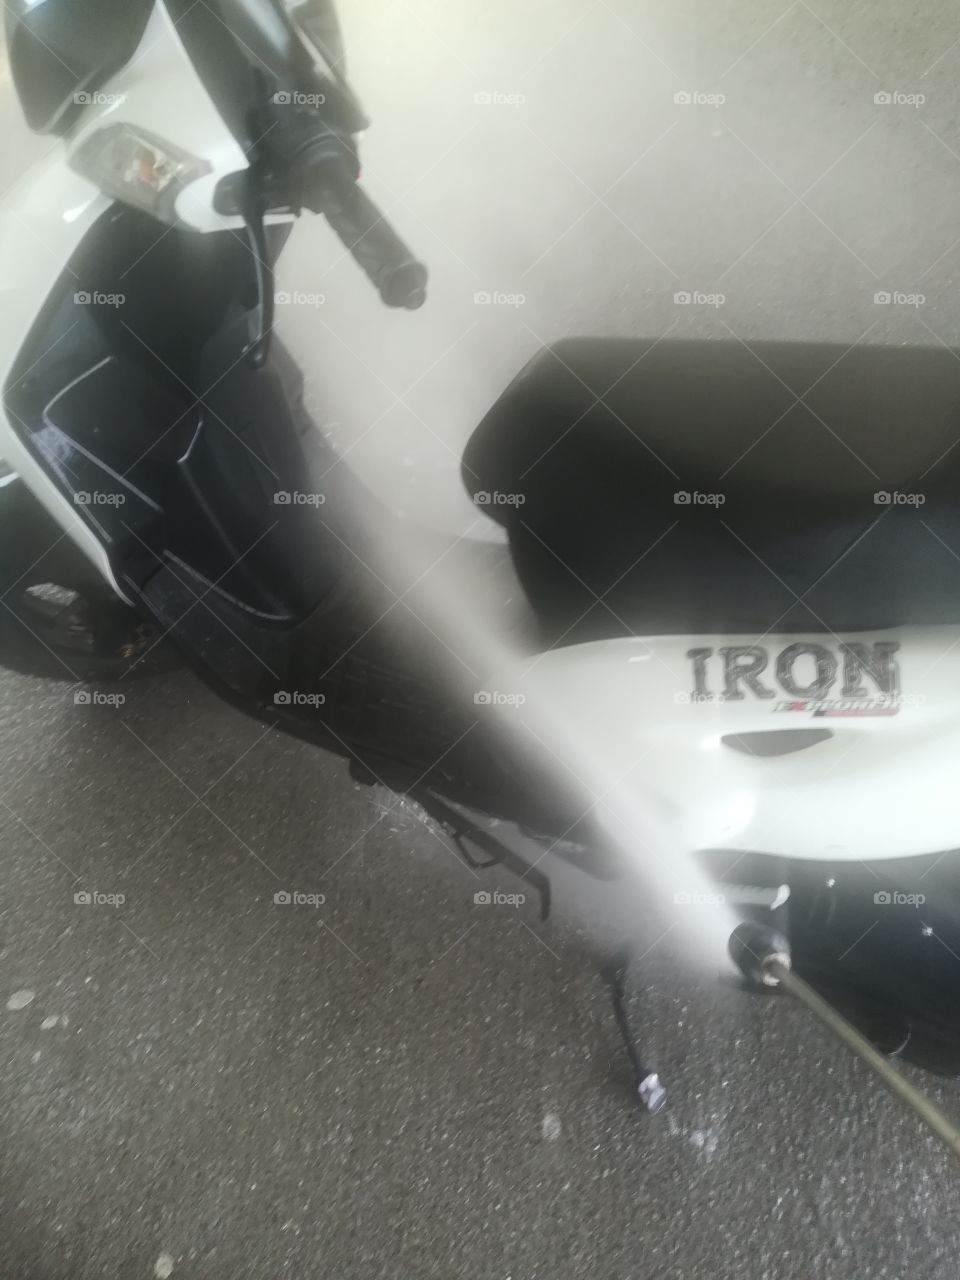 Moped wash